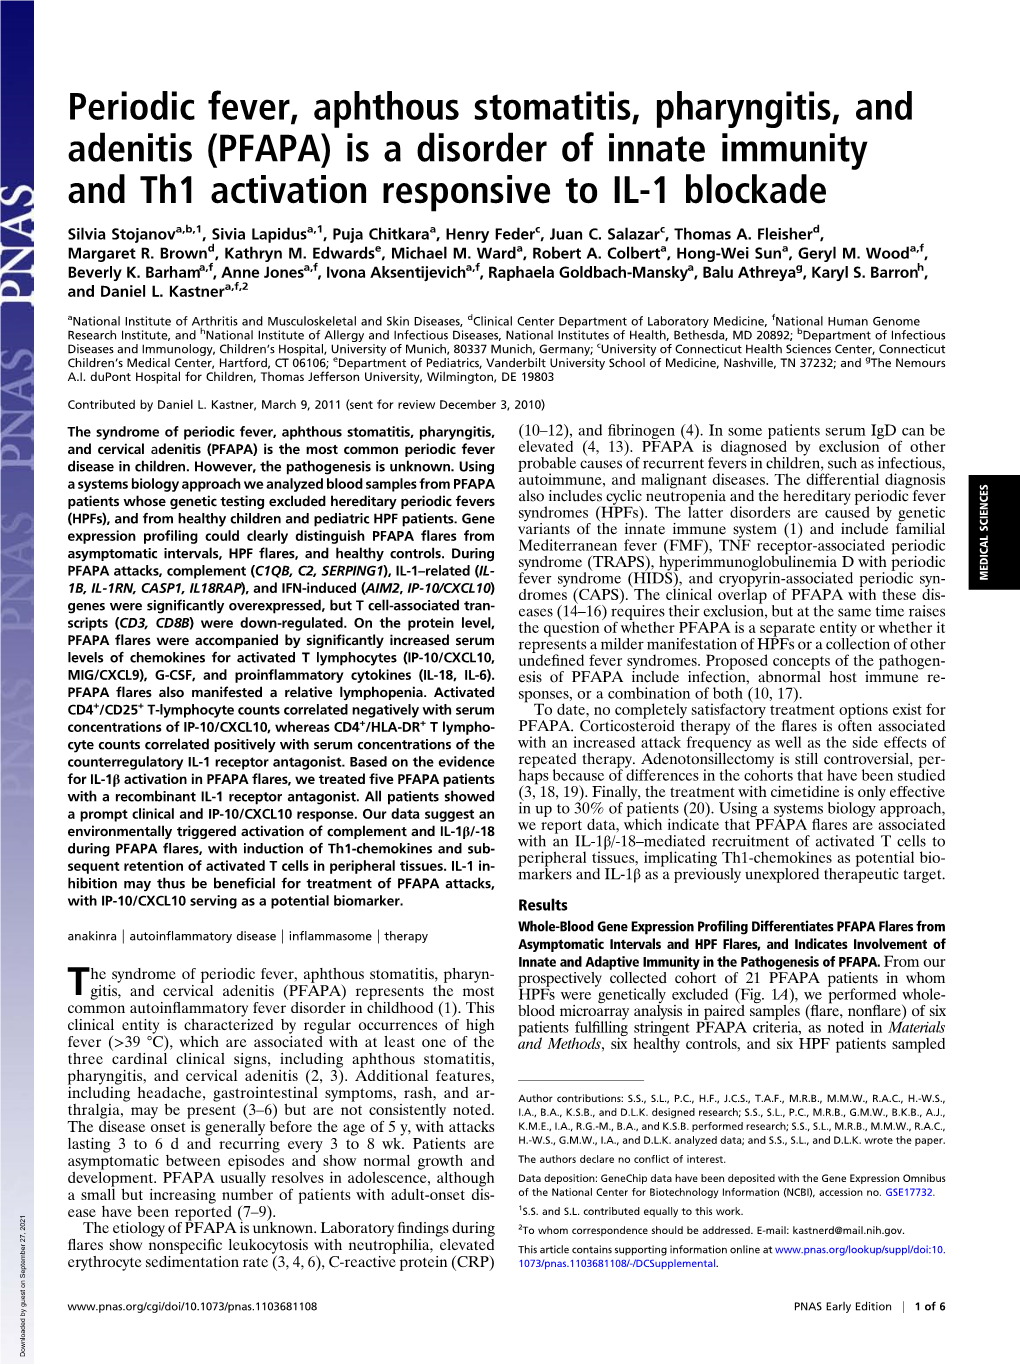 Periodic Fever, Aphthous Stomatitis, Pharyngitis, and Adenitis (PFAPA) Is a Disorder of Innate Immunity and Th1 Activation Responsive to IL-1 Blockade